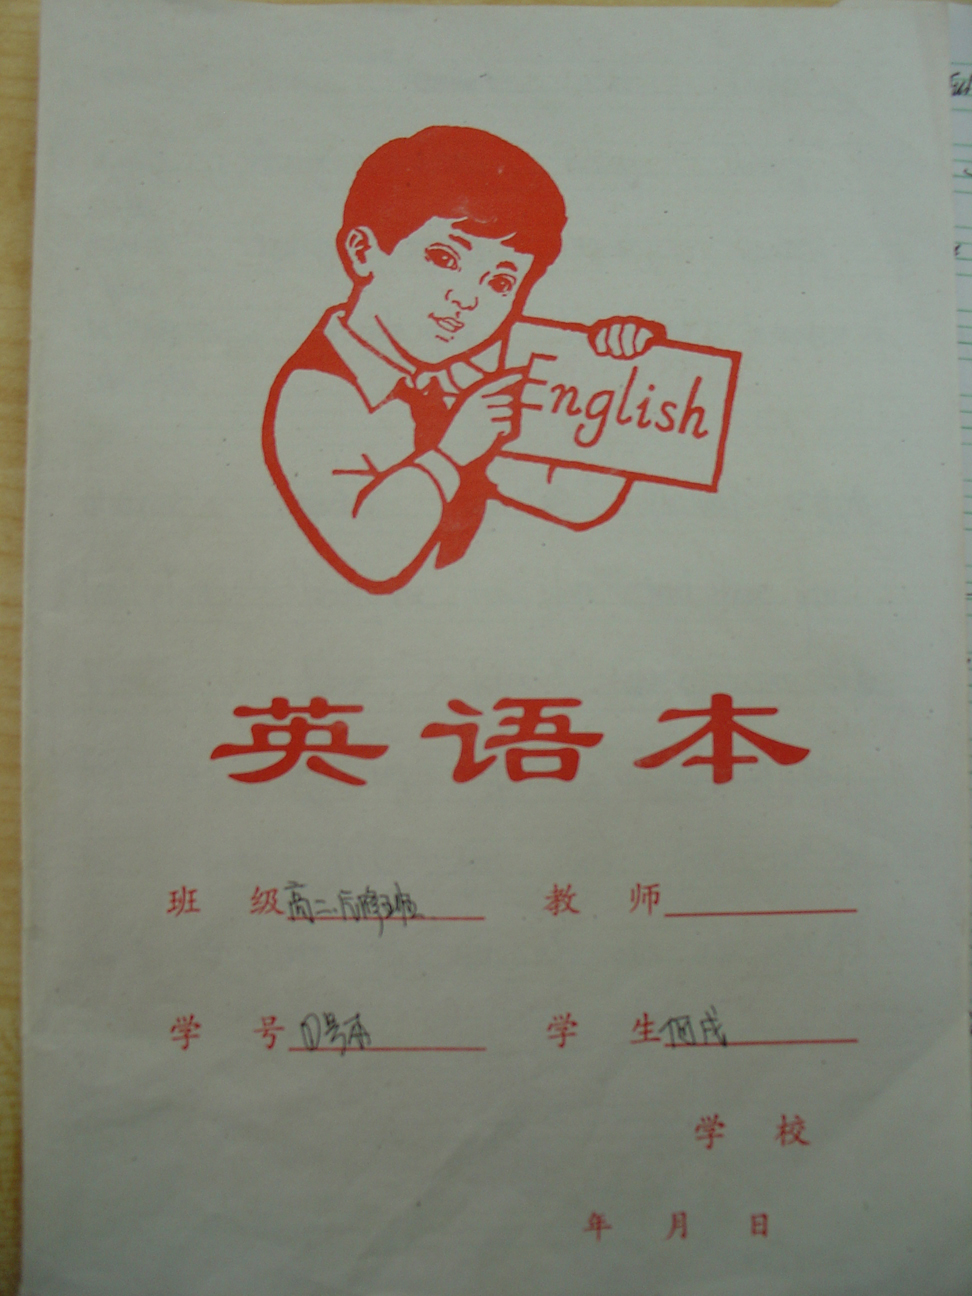 A Chinese English exercise book